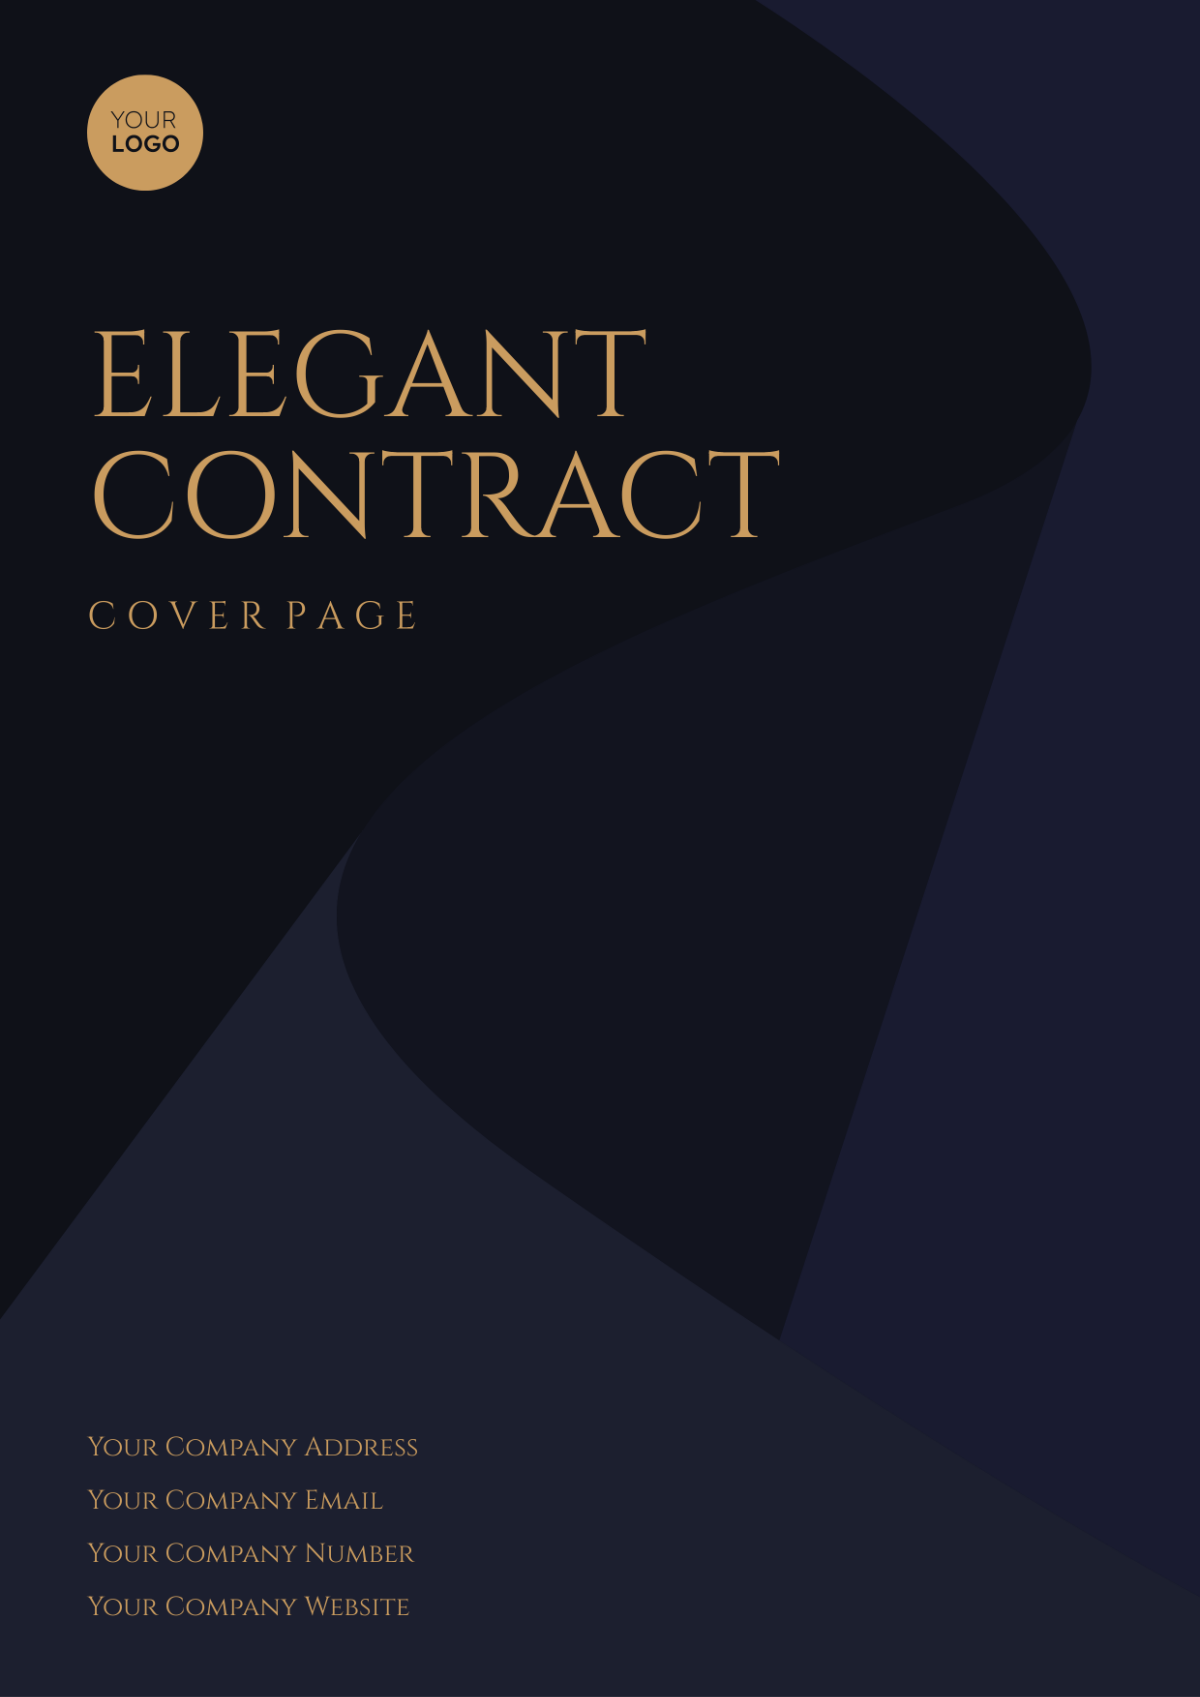 Elegant Contract Cover Page